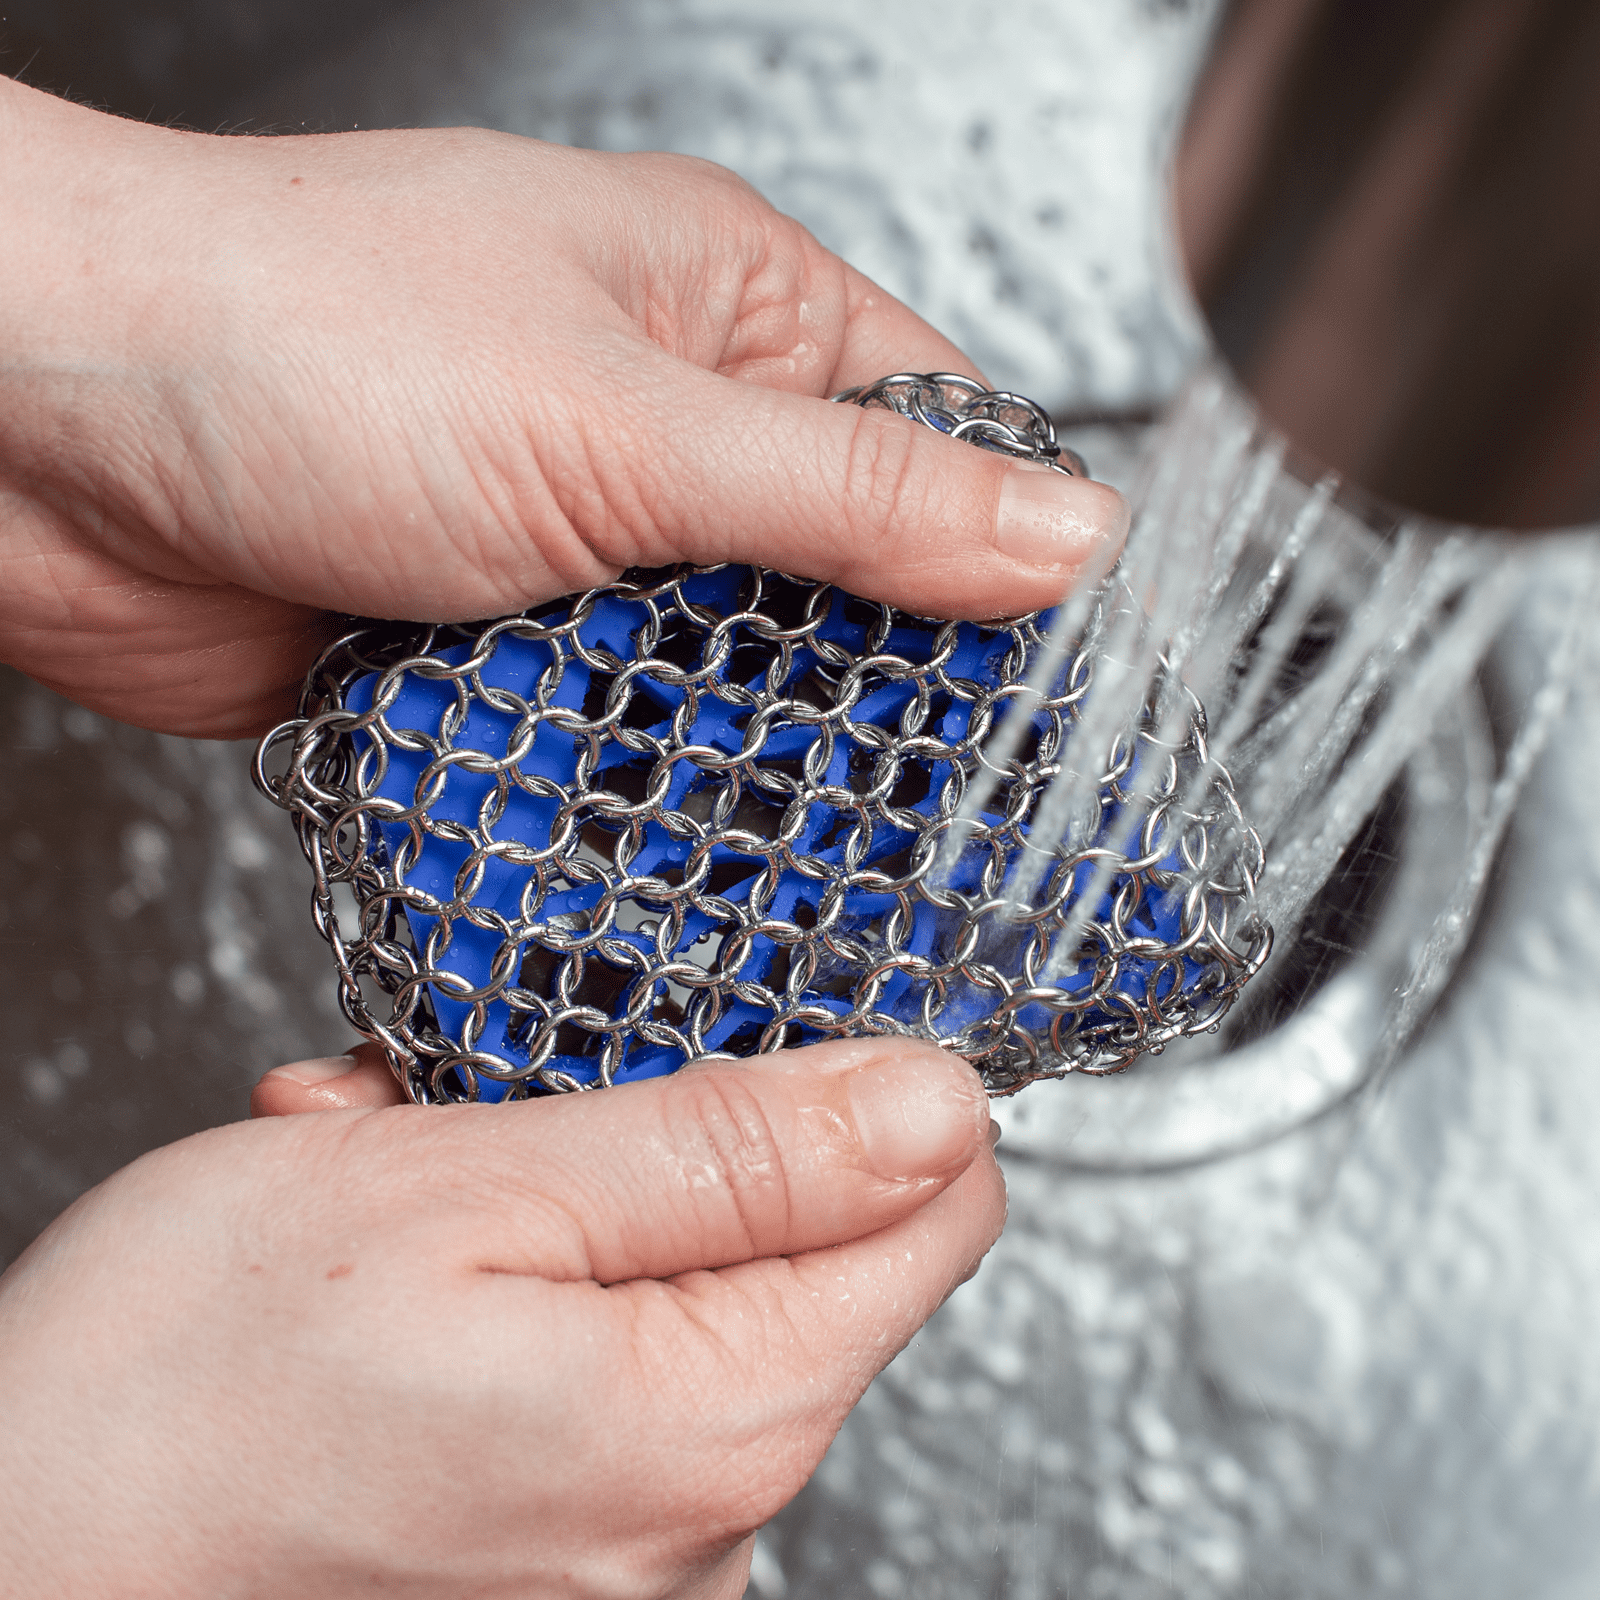 Lodge Chain Mail Scrubber Review